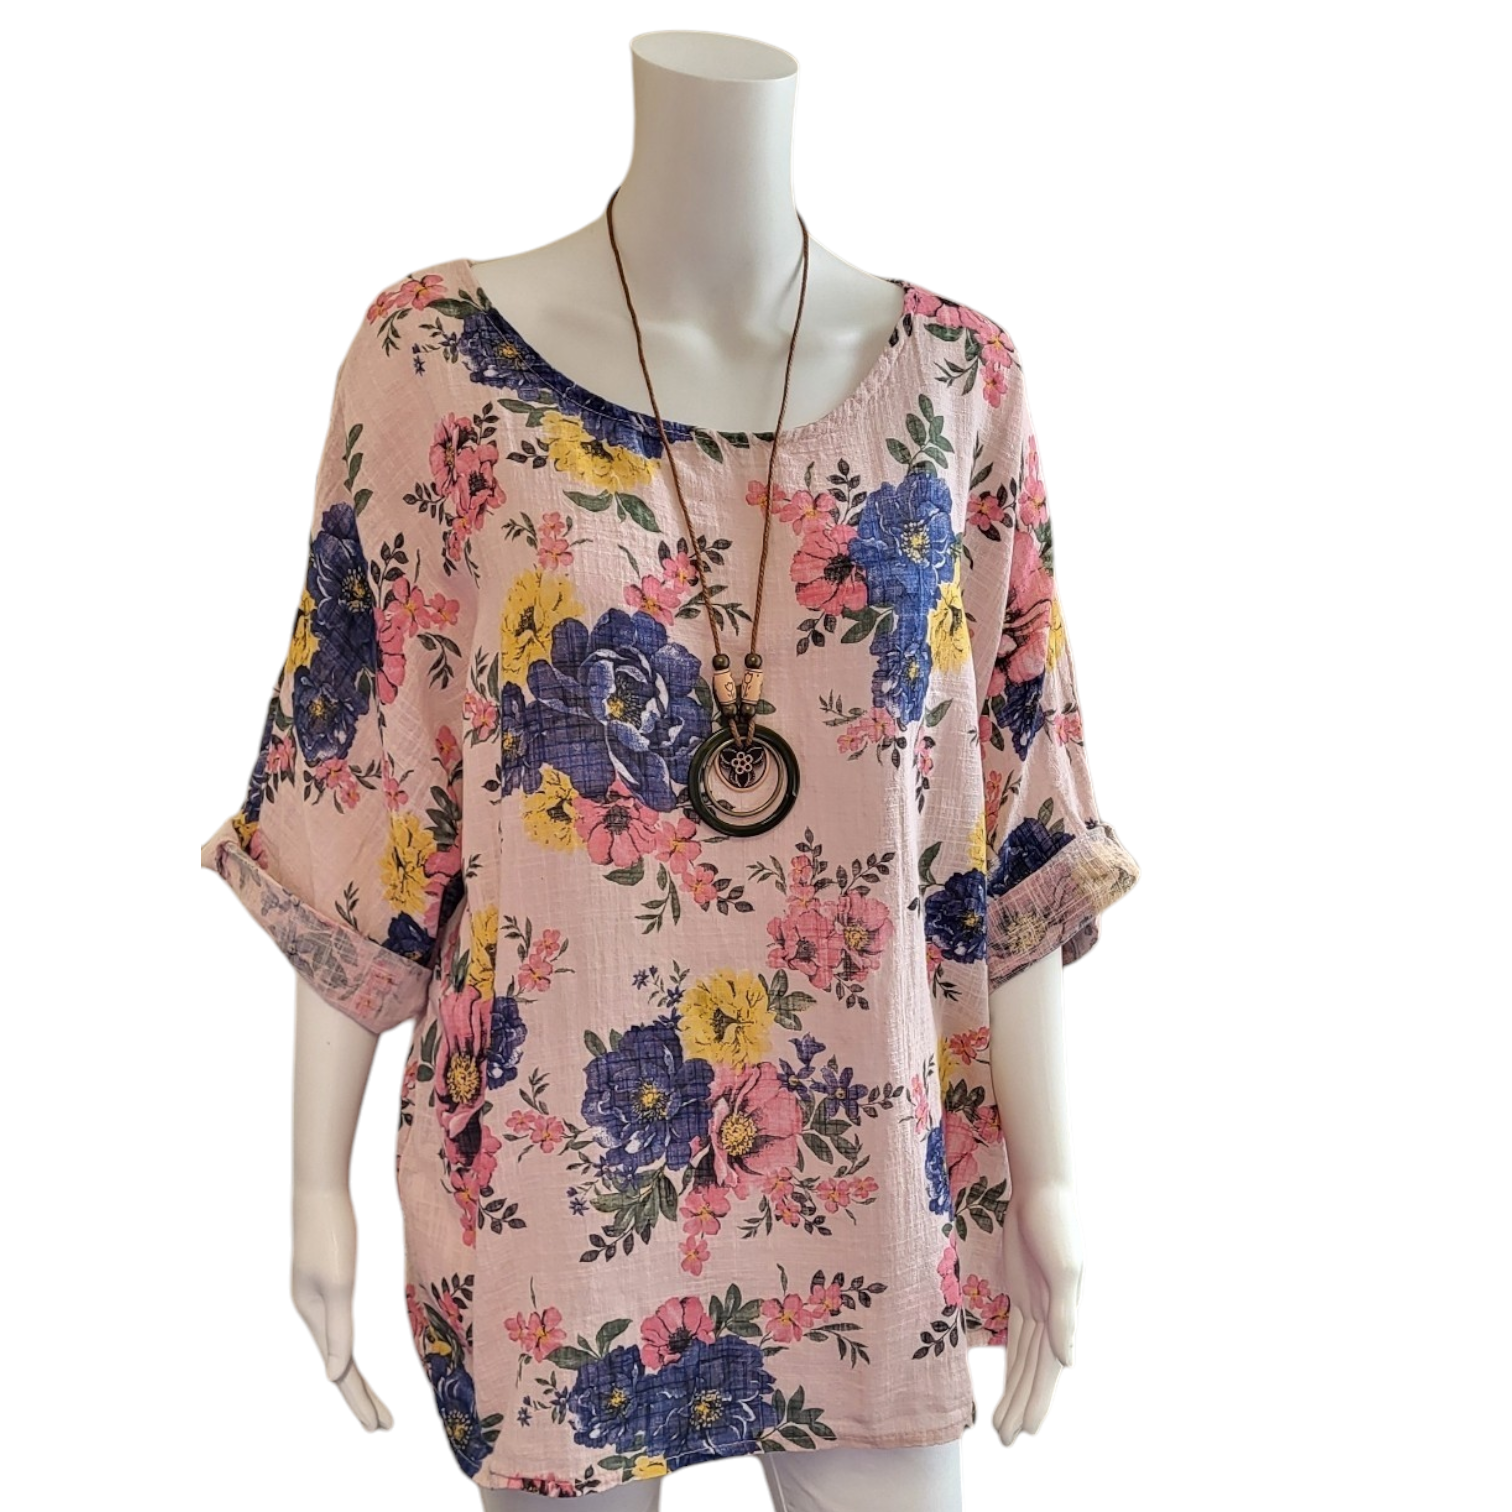 pale pink cotton top with large blue and yellow flowers. image shows necklace that is provided too.